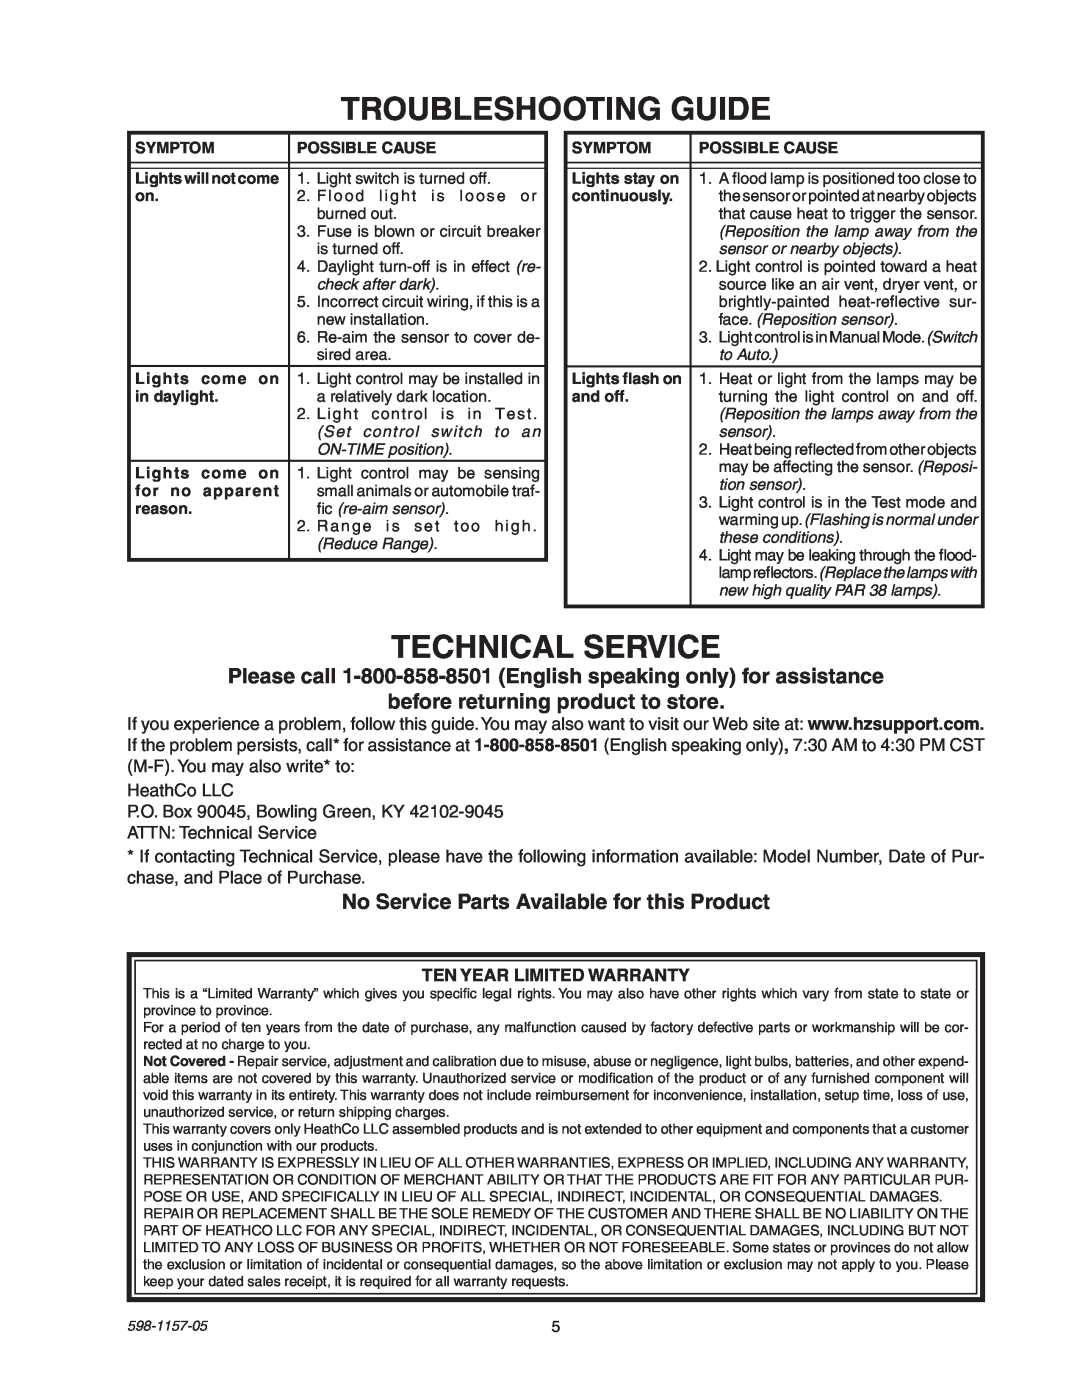 Heath Zenith SH-5411 manual Troubleshooting Guide, Technical Service, before returning product to store 